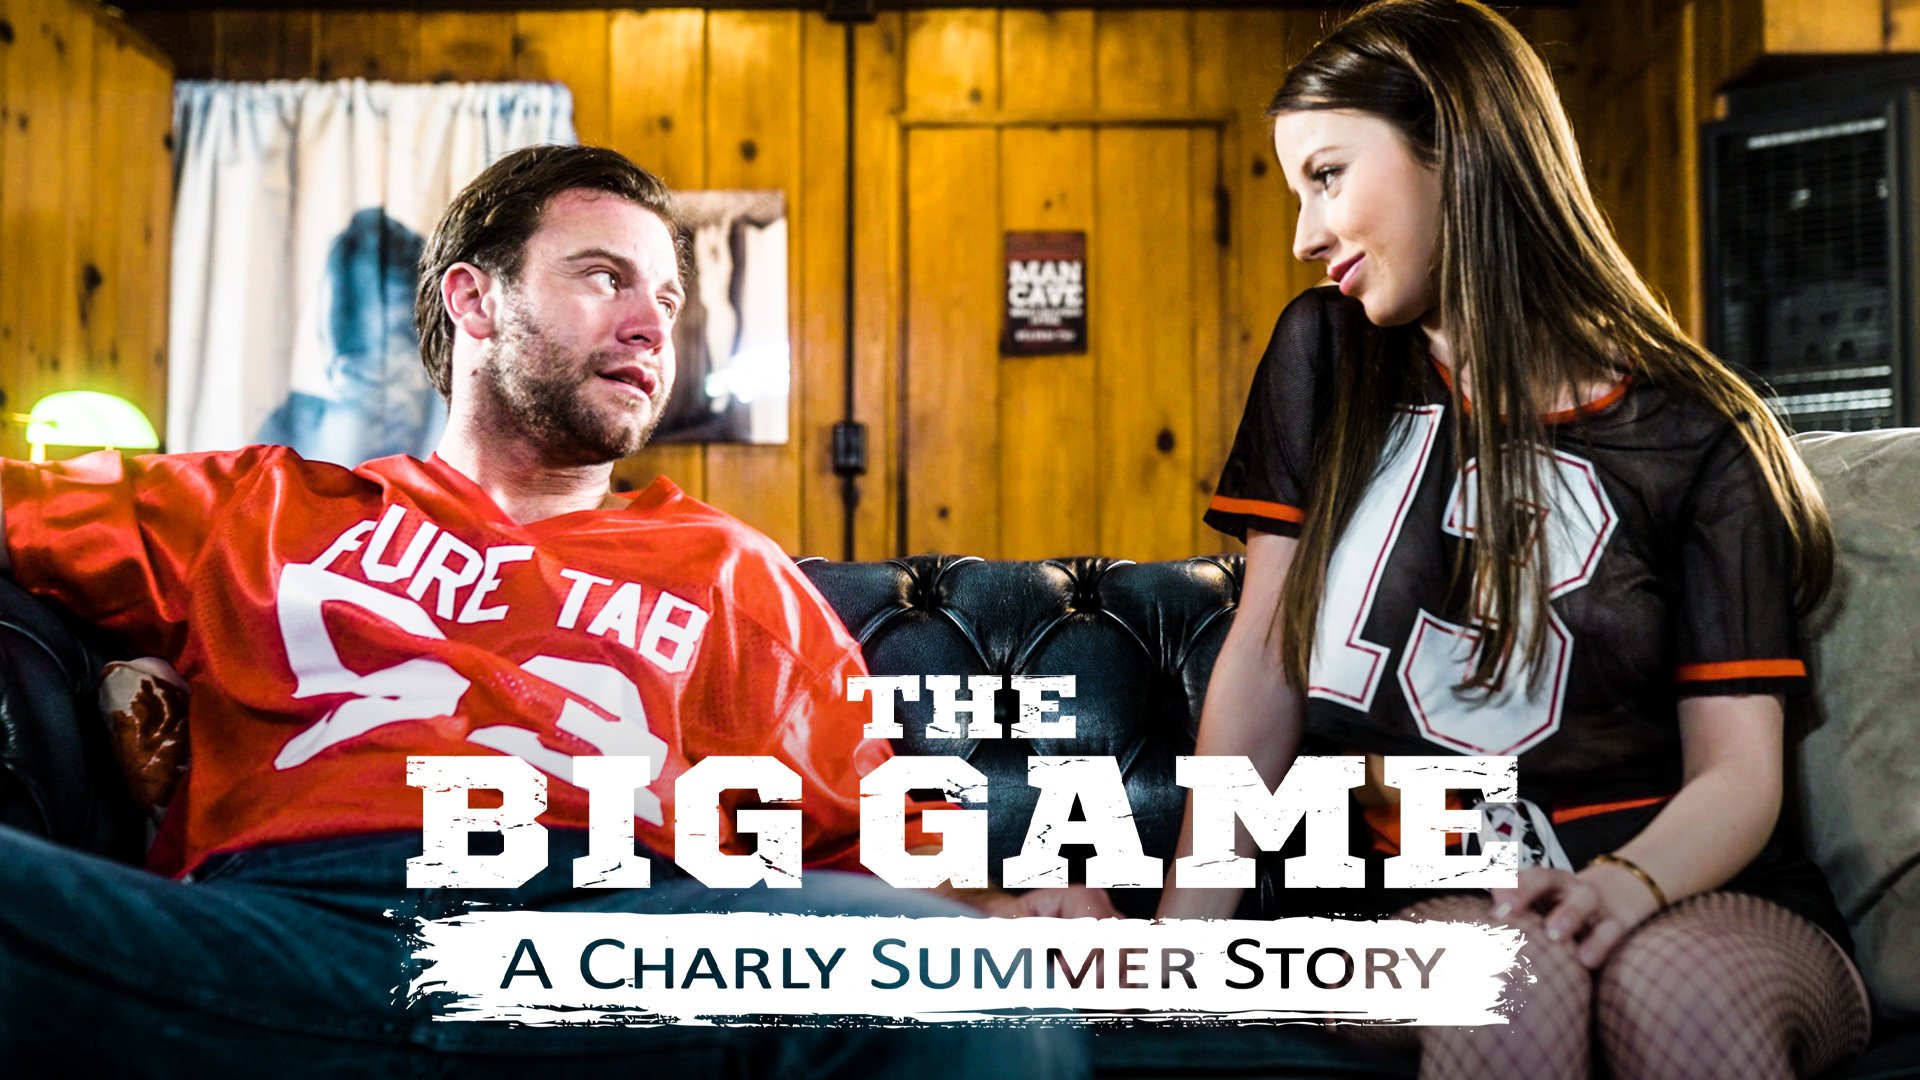 PureTaboo - Charly Summer - The Big Game A Charly Summer Story